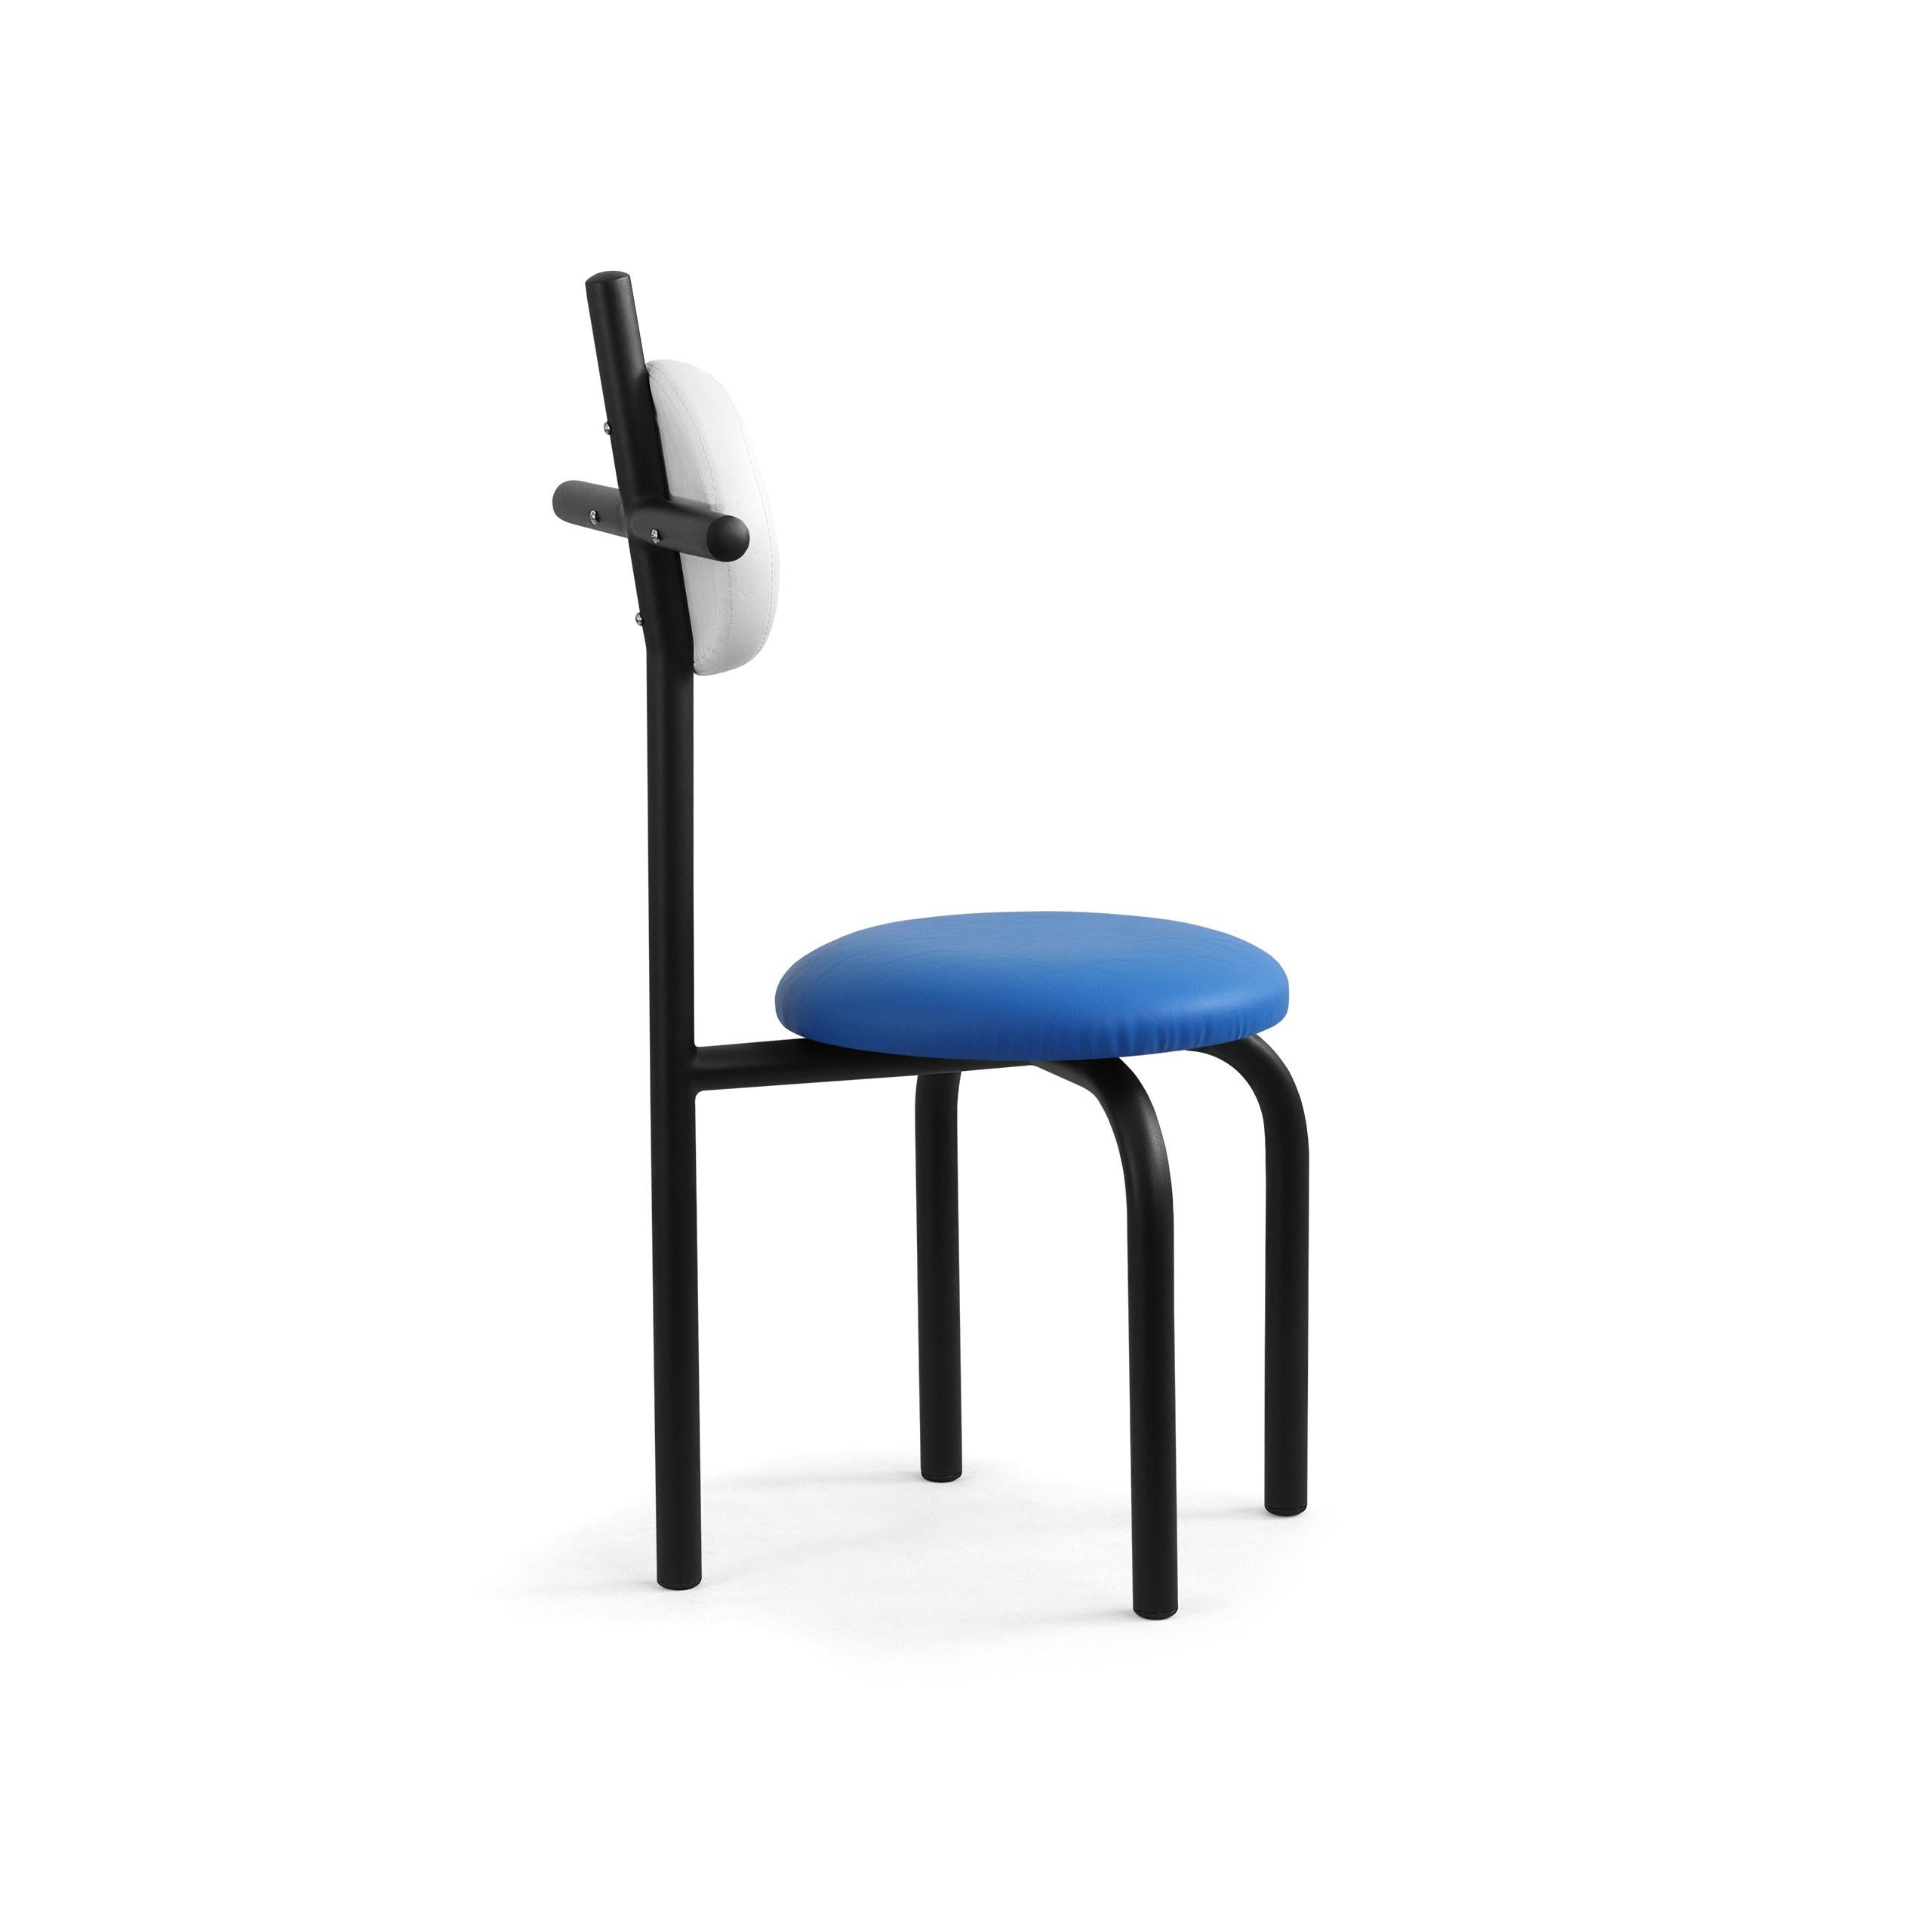 Appliqué PK16 Impermeable Chair, Blue Seat & Carbon Steel Structure by Paulo Kobylka For Sale